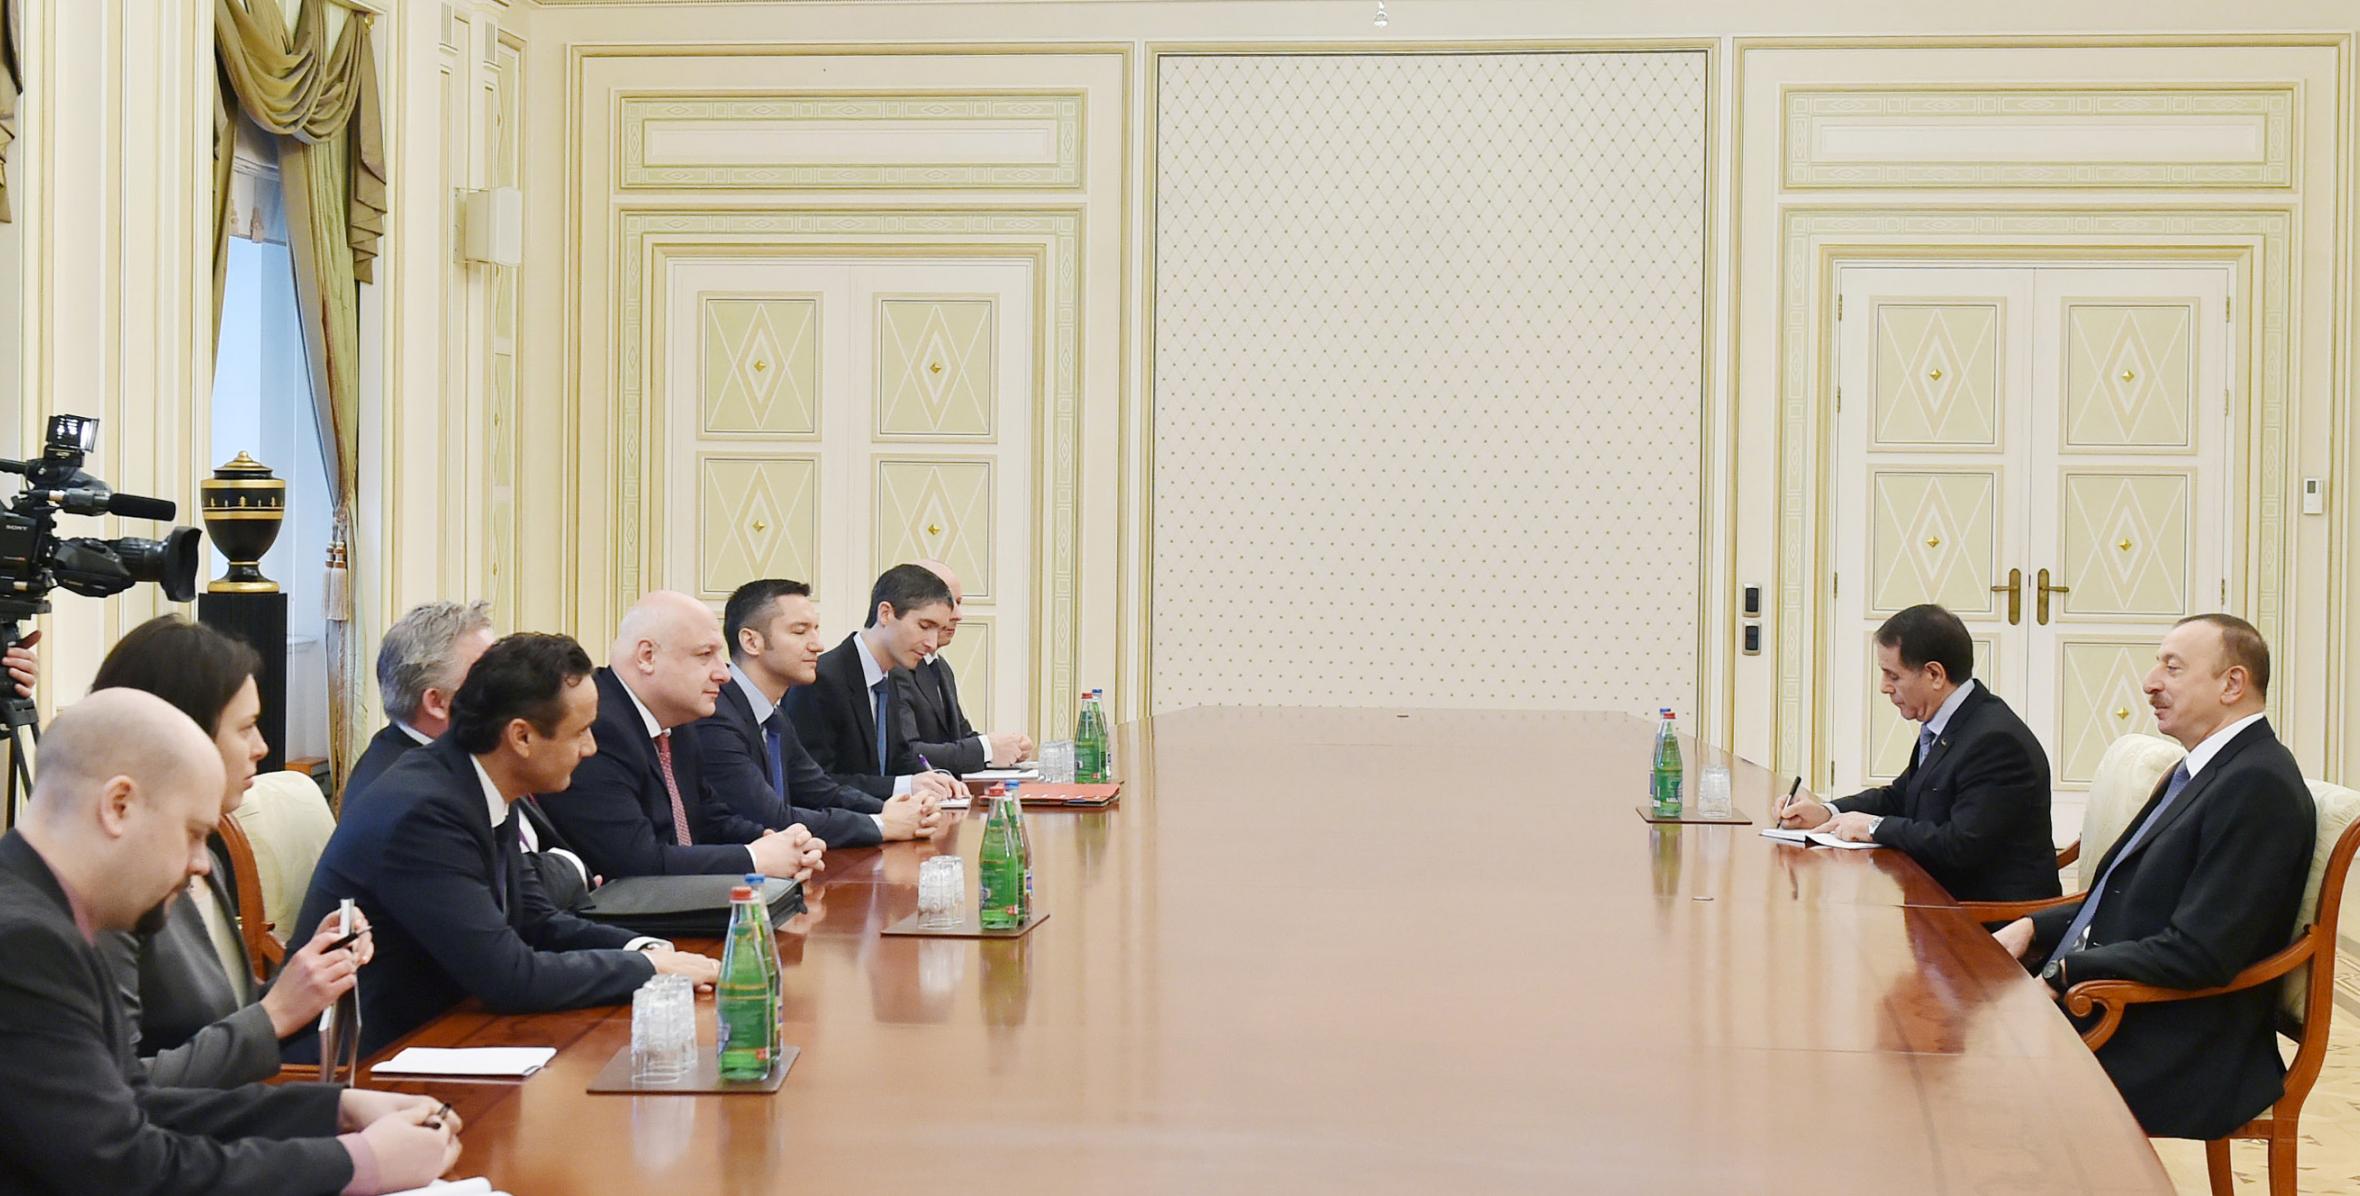 Ilham Aliyev received a delegation of the OSCE Parliamentary Assembly